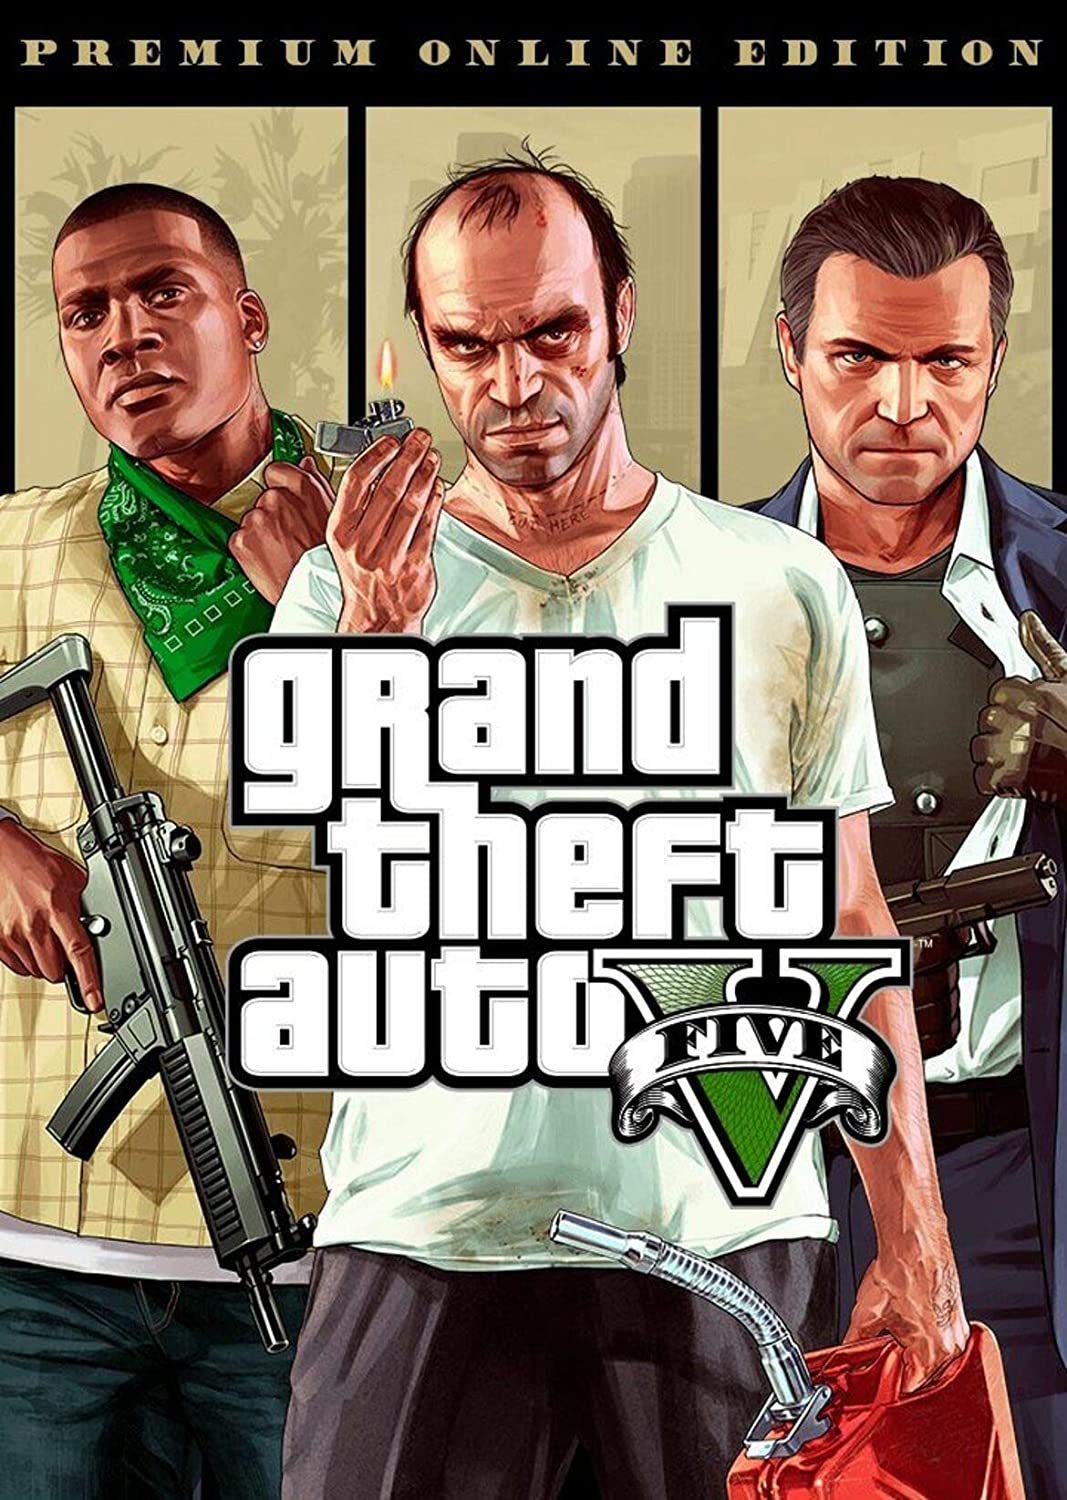 Grand Theft Auto 5 Full Game PC and Install